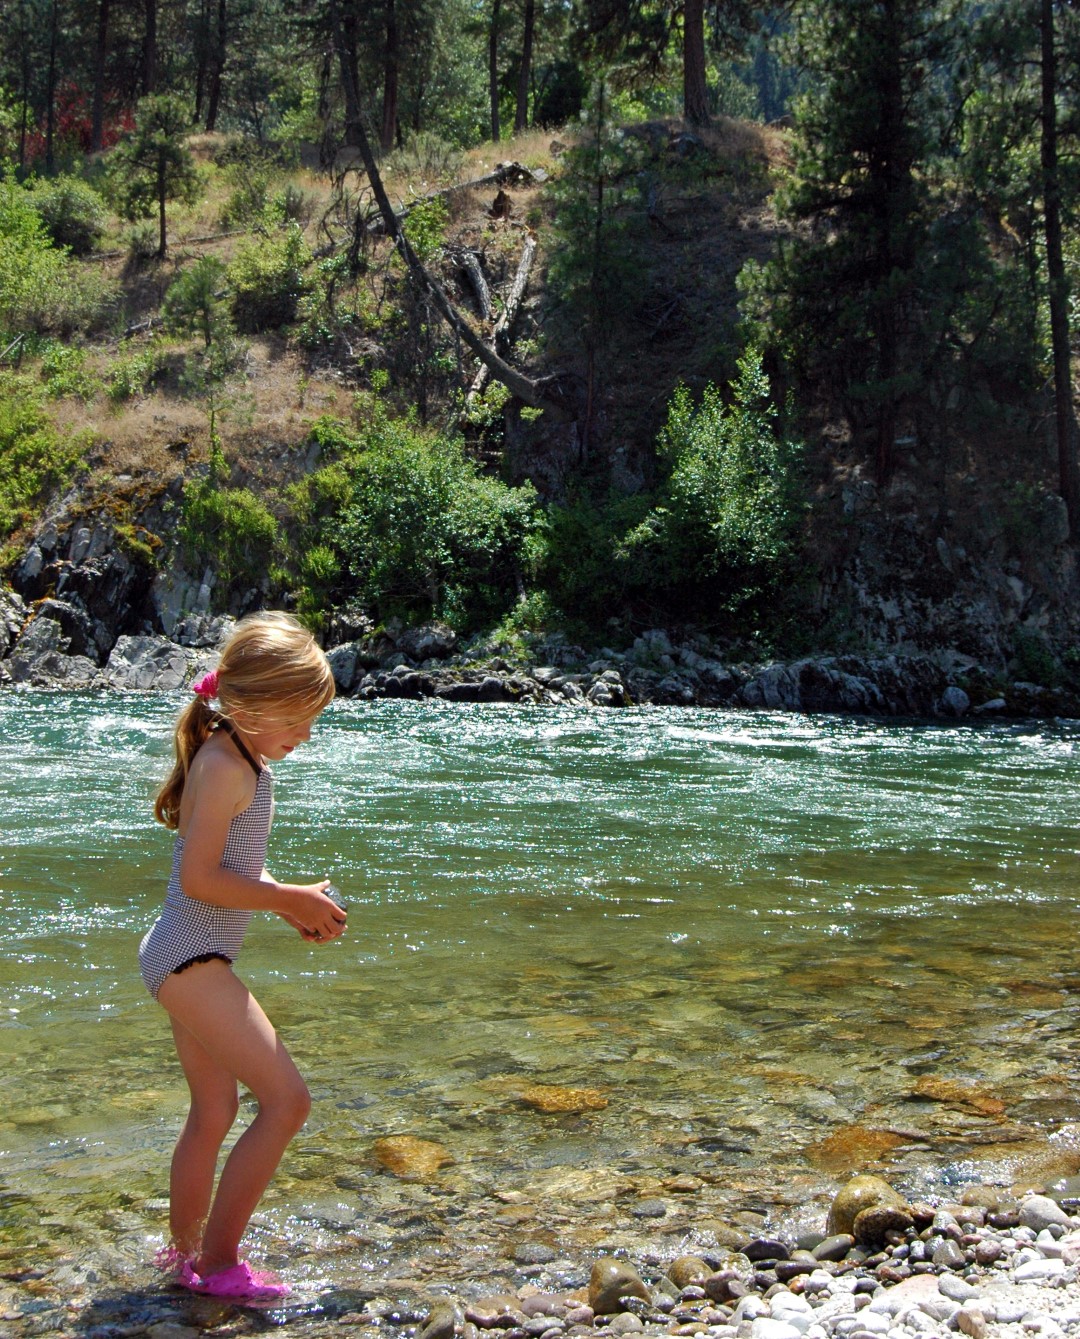 There’s plenty to do when you fly in to Garden Valley (U88), Idaho. The beautiful South Fork of the Payette River runs alongside the airstrip. A hot spring runs right into the river, so you can soak with a view. Plus, there’s a target range across the road just northeast of the runway. Photo by Crista Worthy.